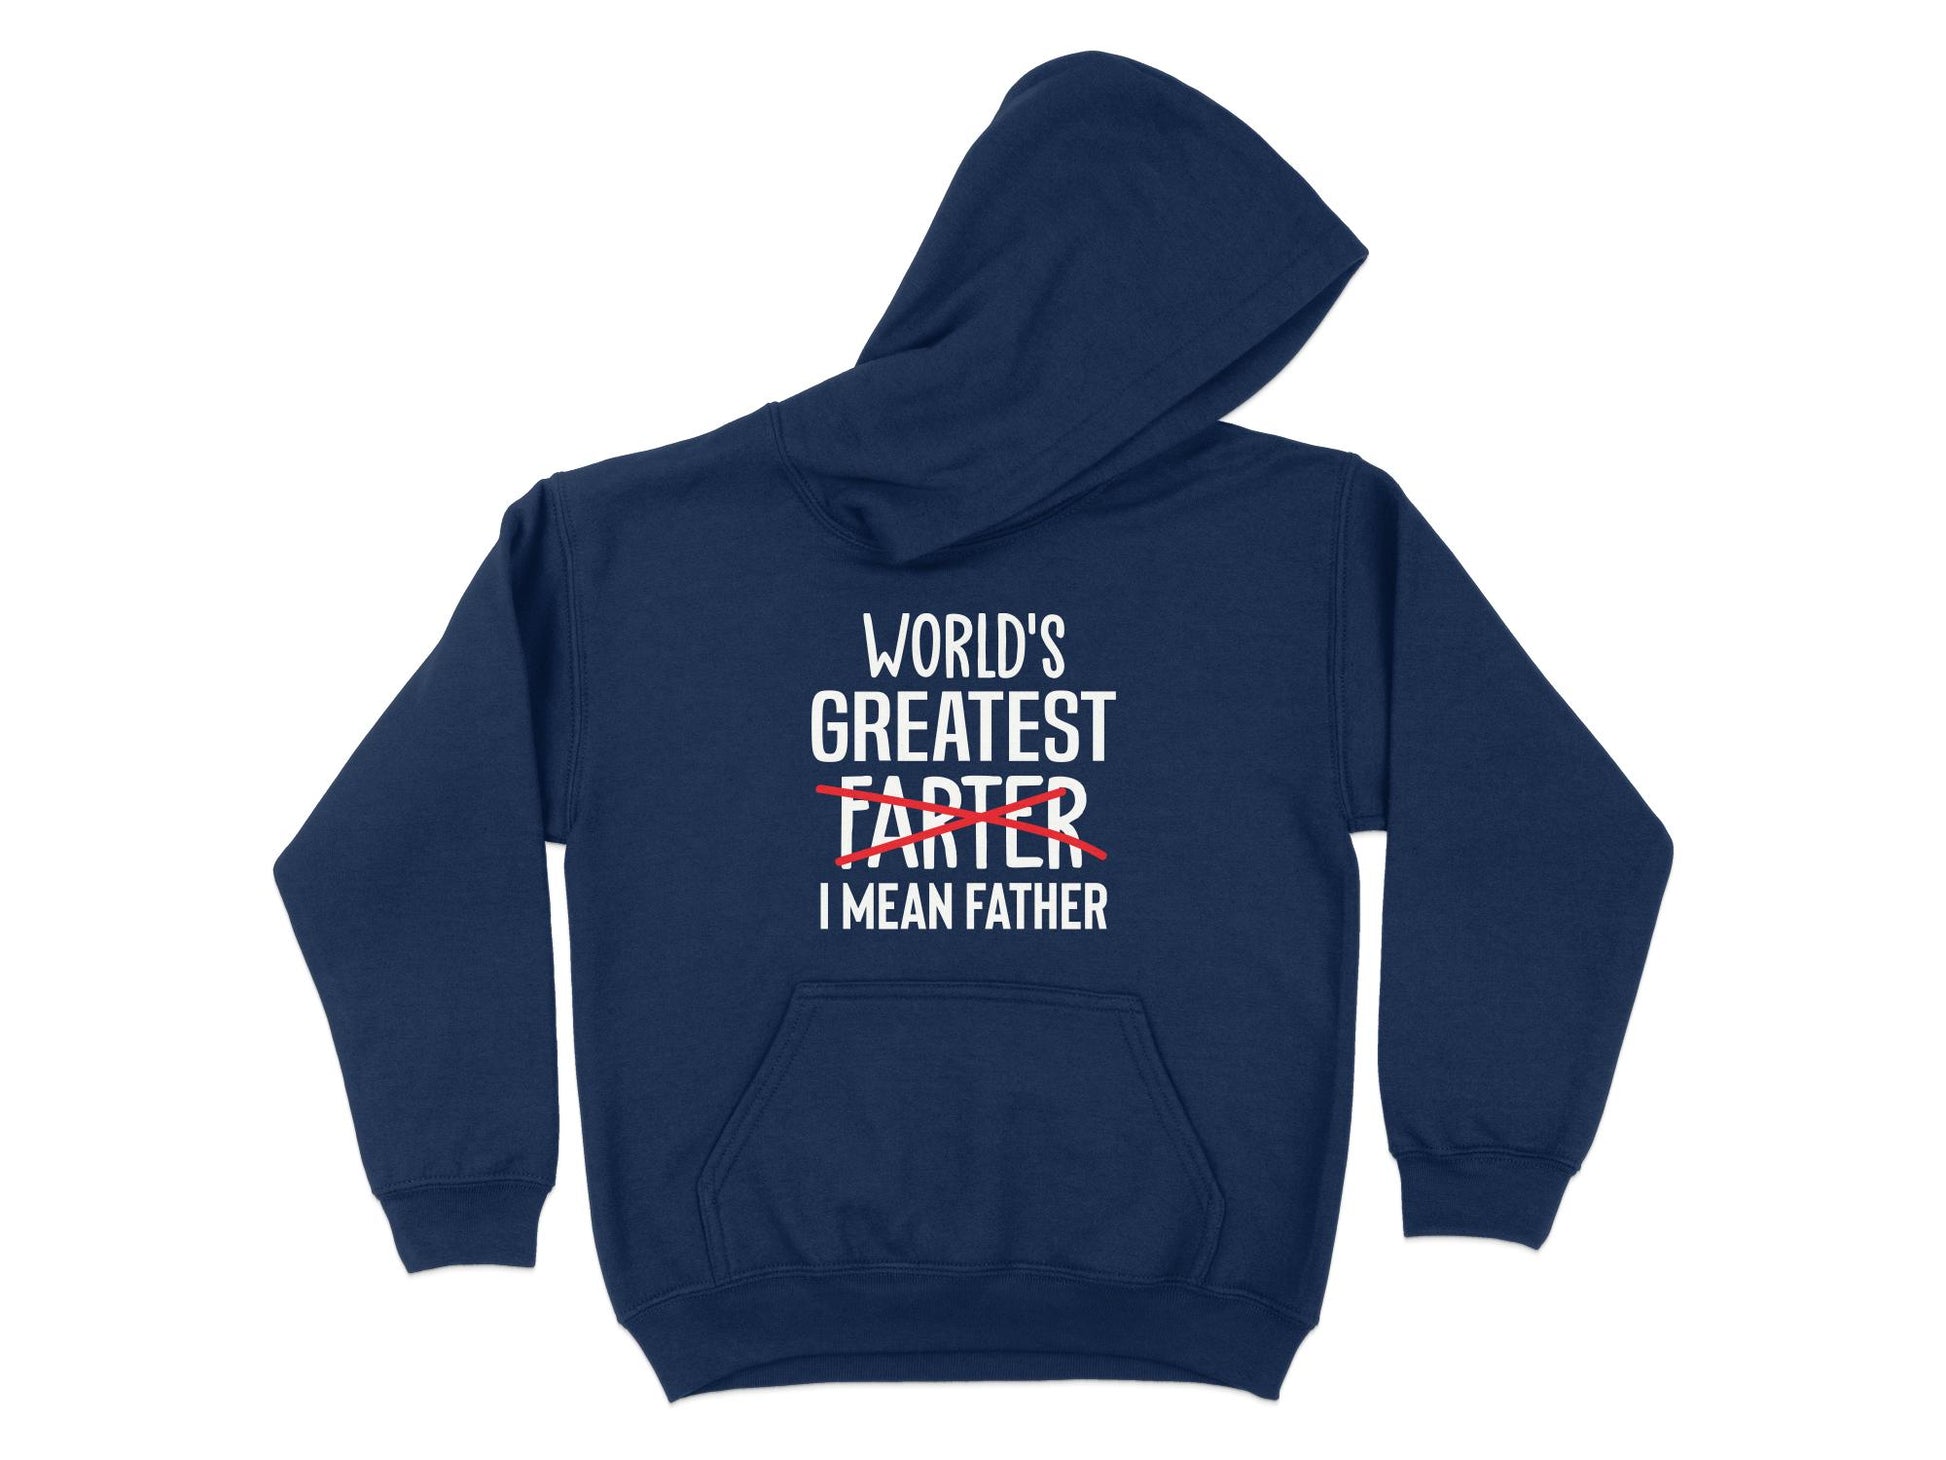 World's Greatest Farter I Mean Father Hoodie, navy blue